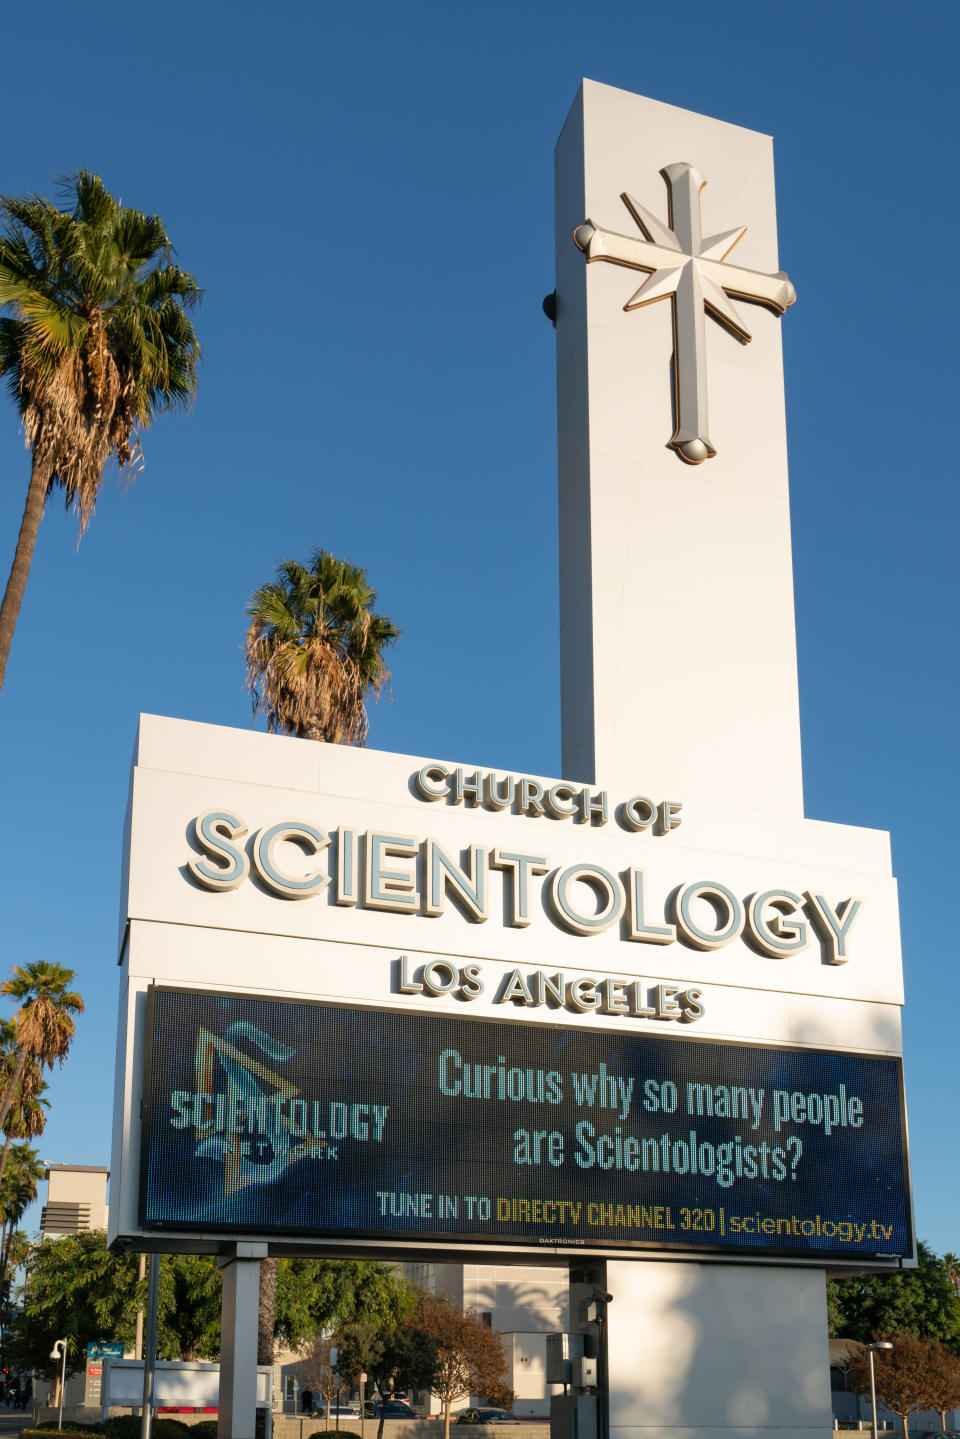 A Church of Scientology pillar and billboard in Los Angeles